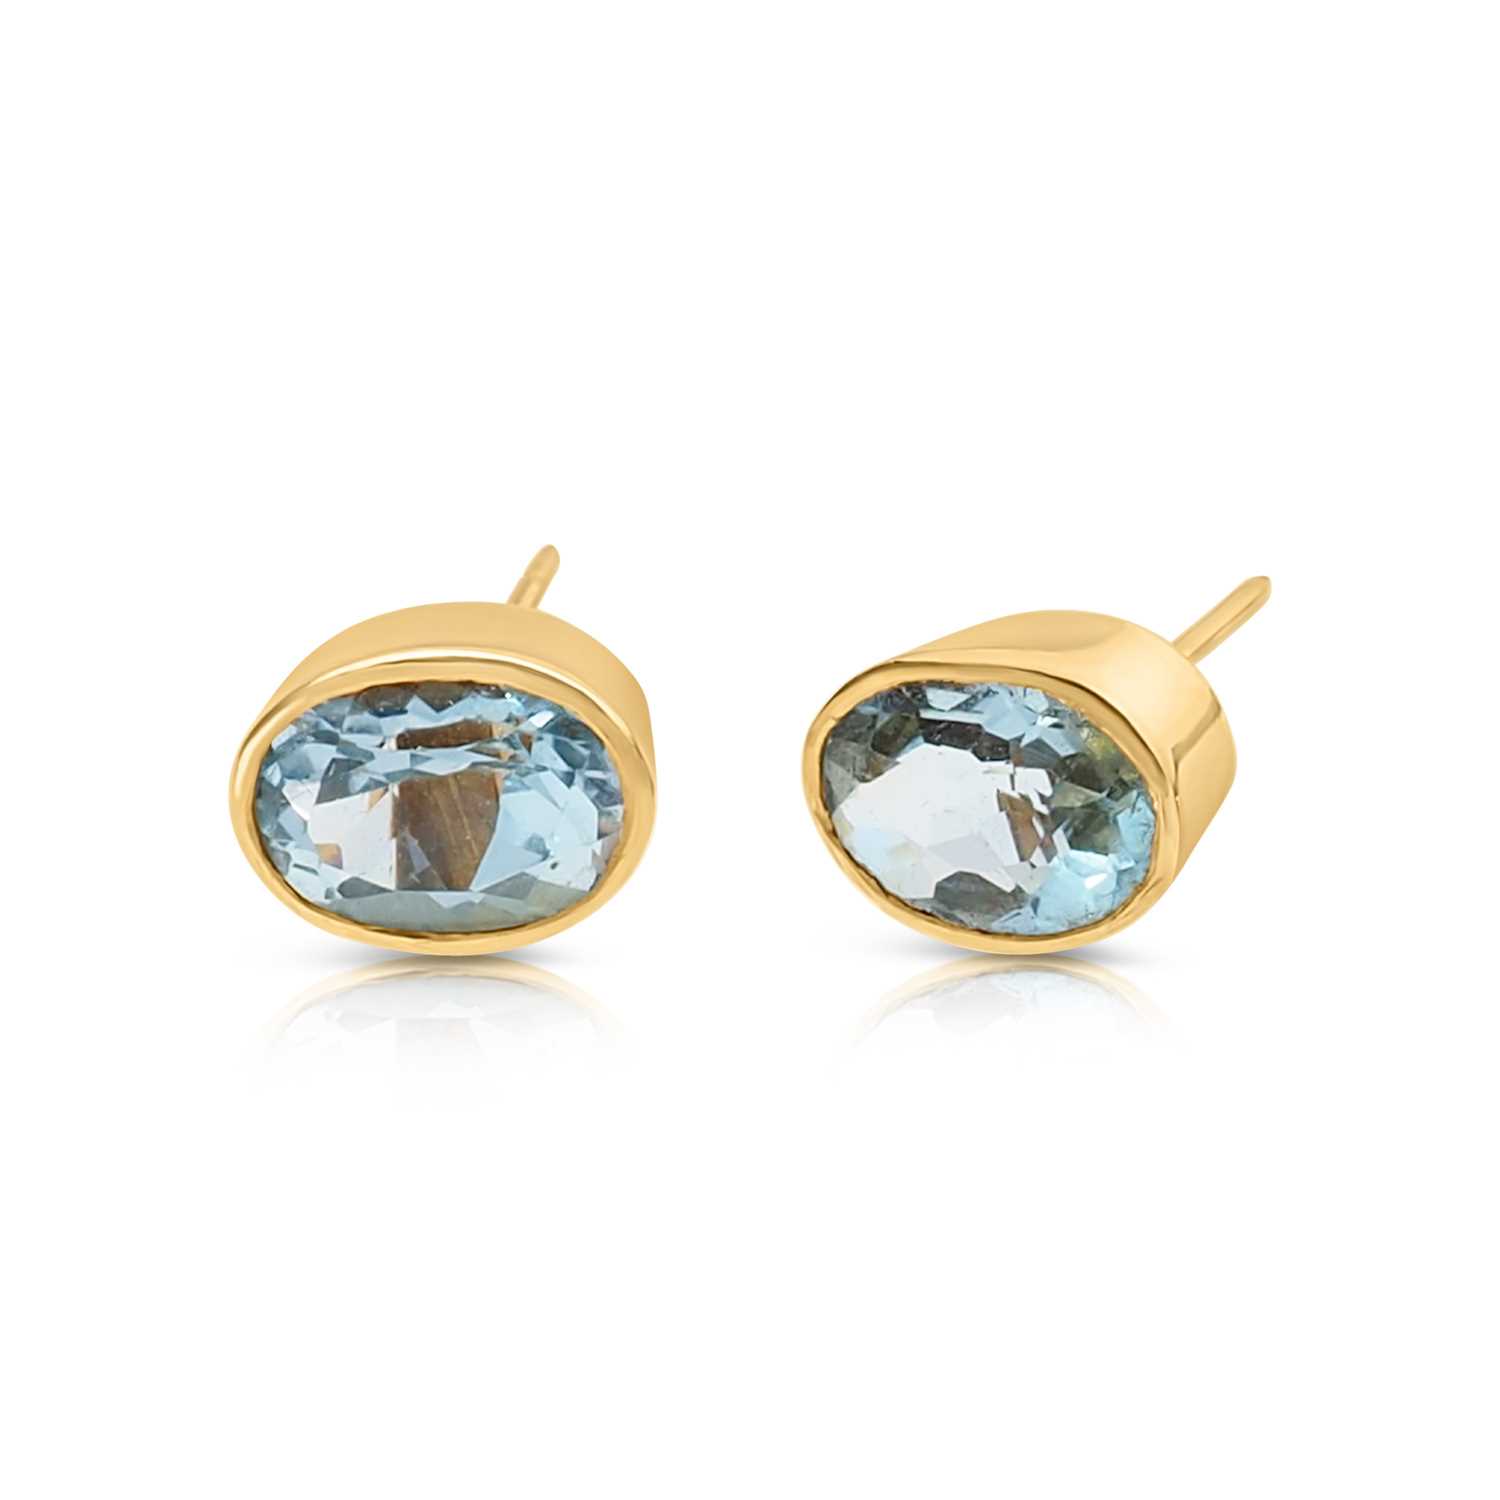 Lot 513 - Pair of 14K Gold and Aquamarine Ear Studs